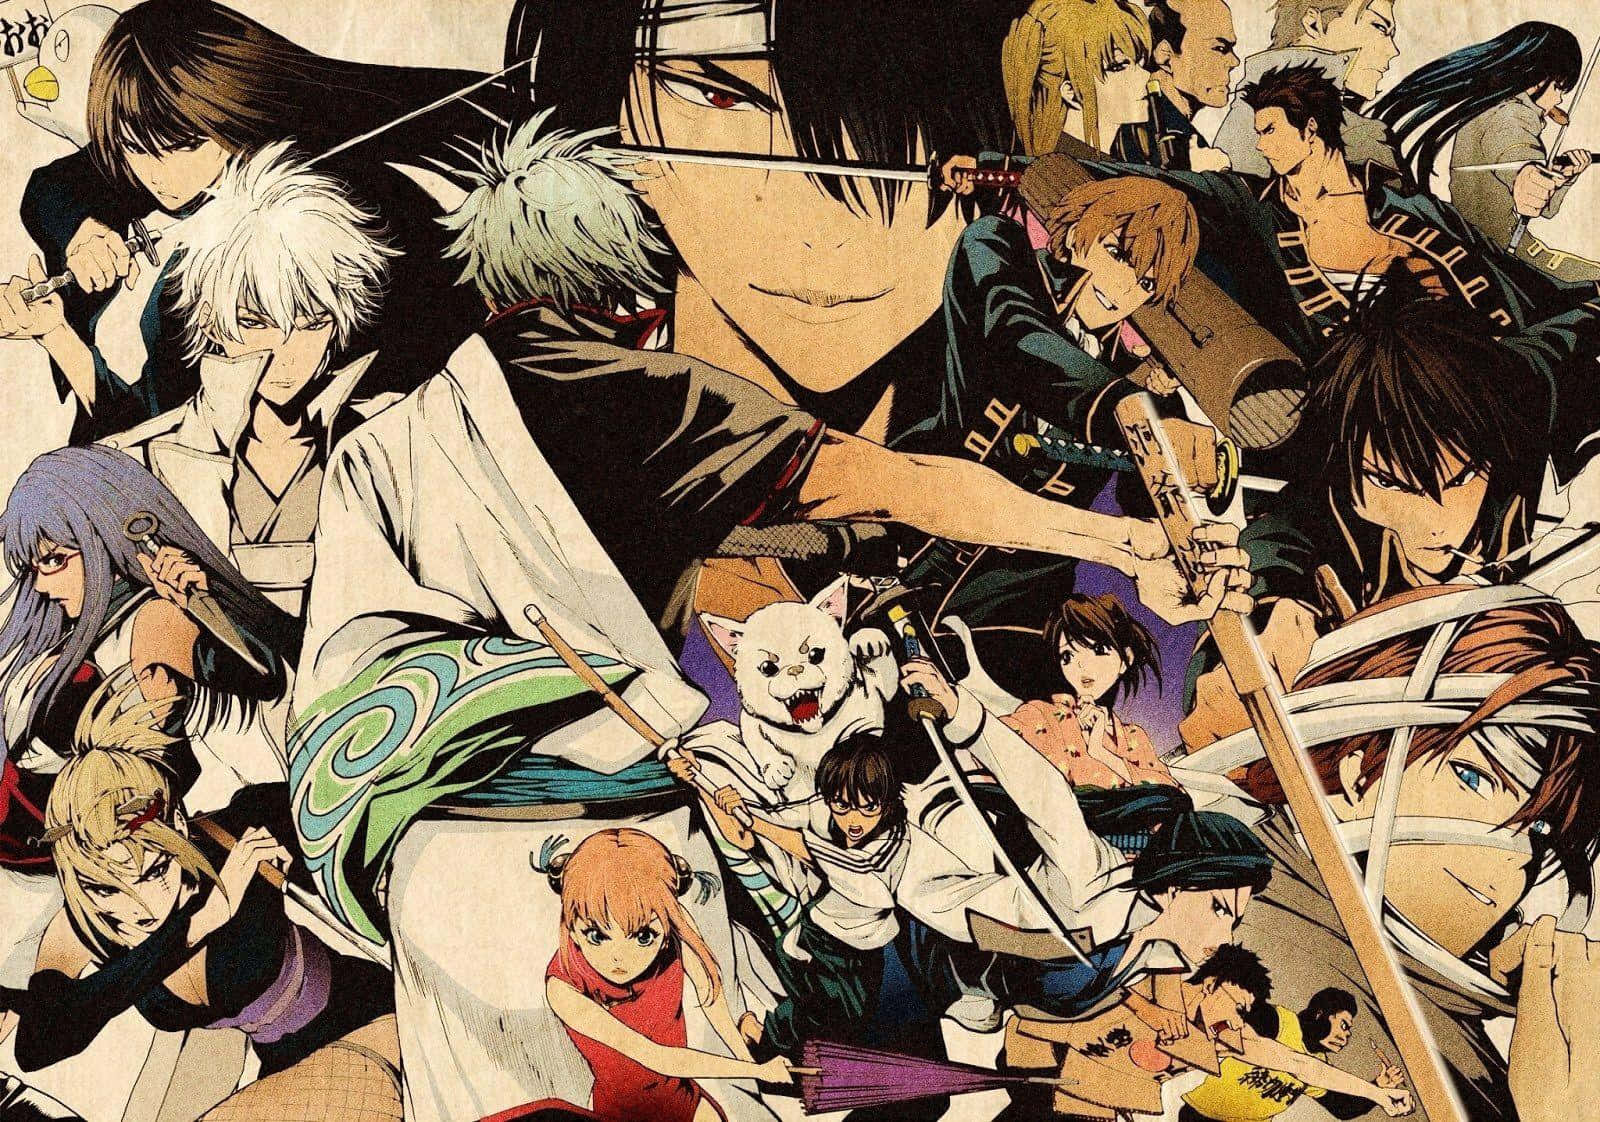 "Gintoki Sakata, the lead character of Gintama, brought hilarity to the world of anime."